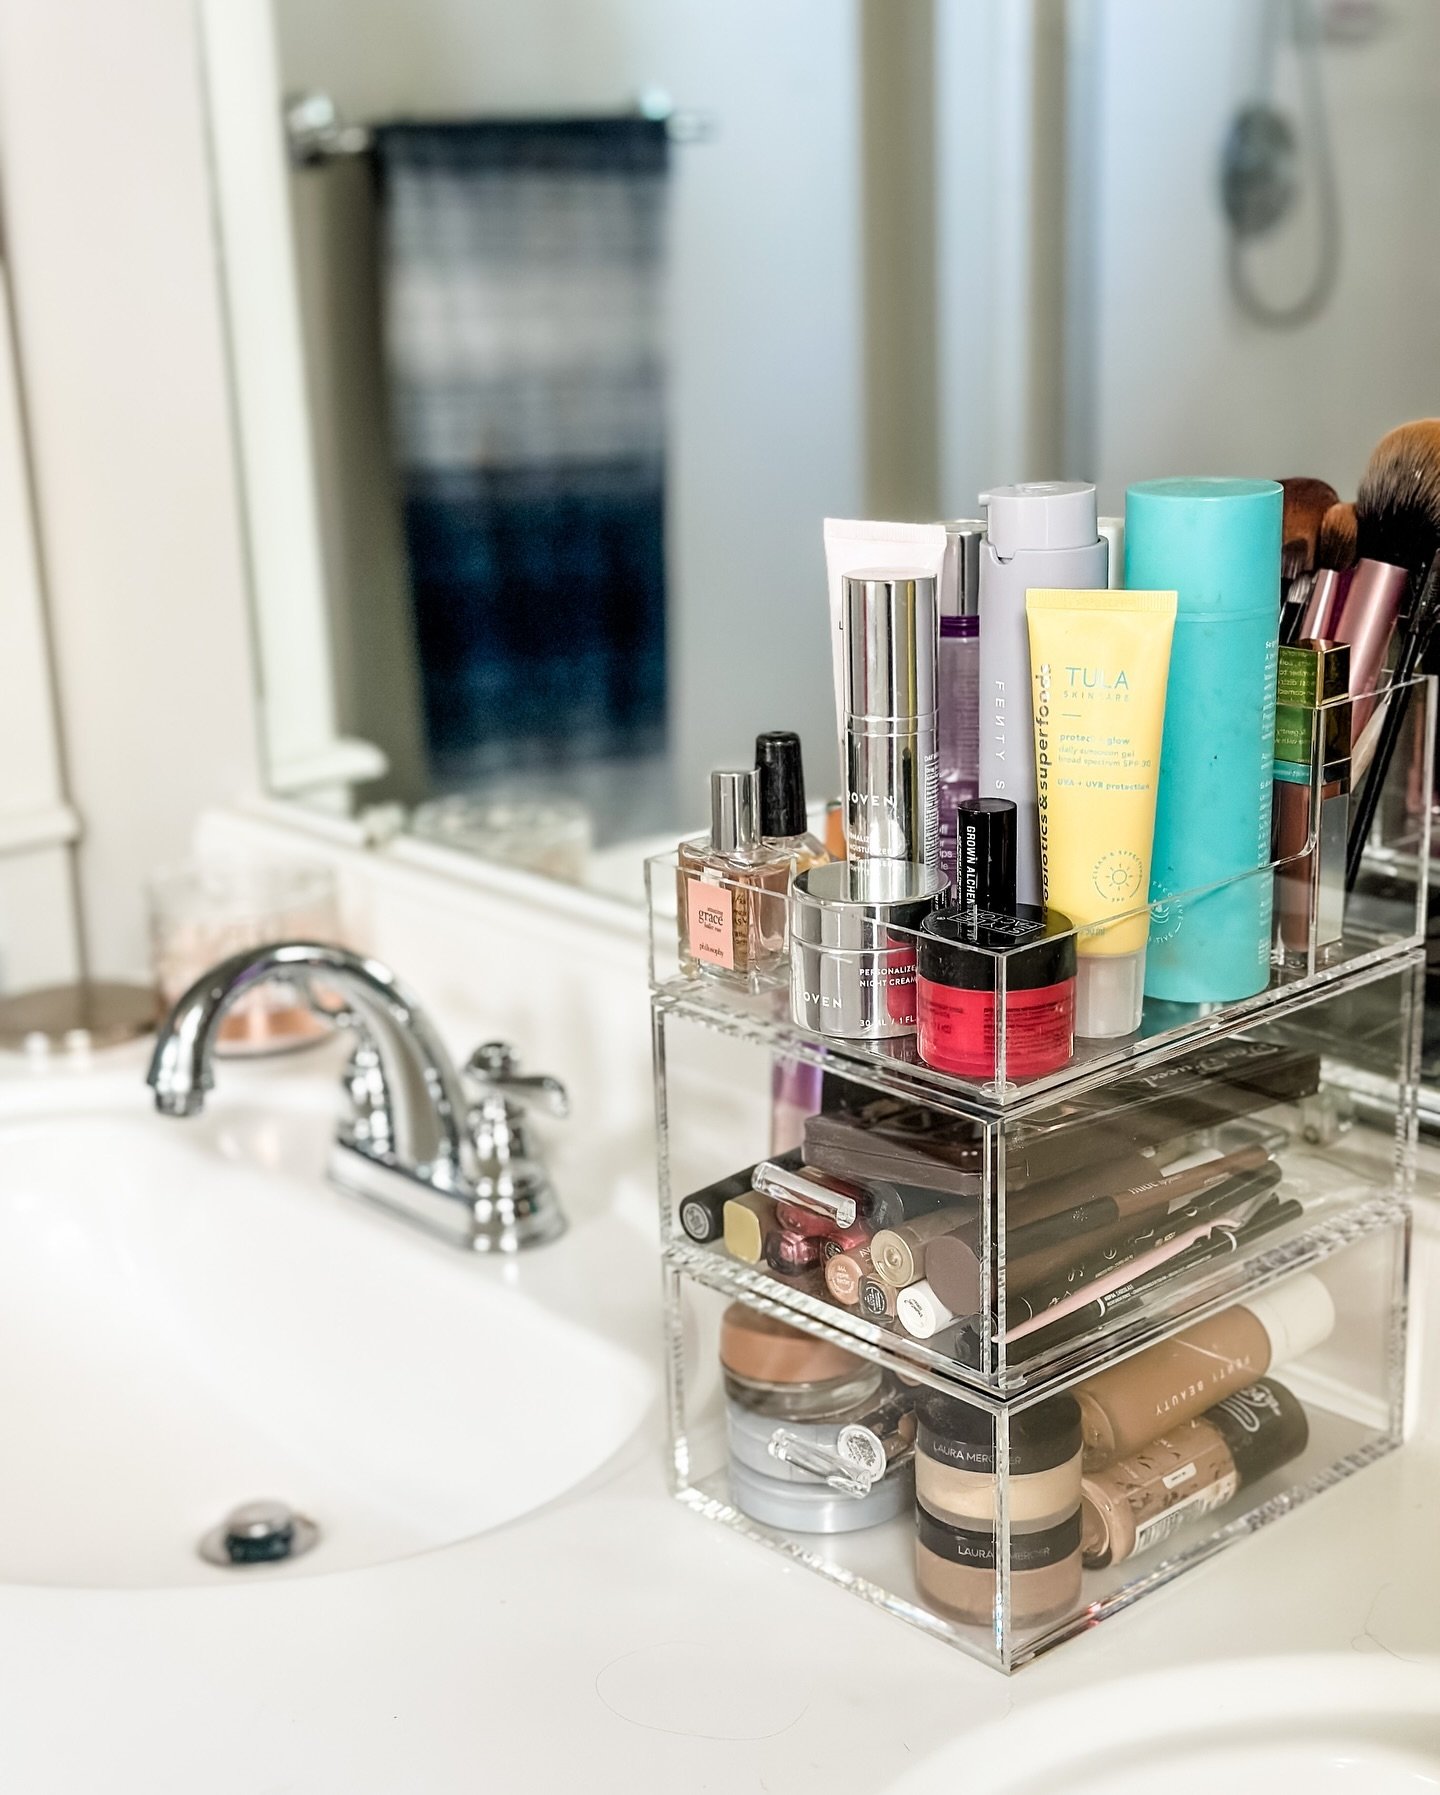 In this bathroom, every item that is used daily is either on the counter or within reach in the upper vanity drawers. The Acrylic Modular Drawers and Cosmetic &amp; Brush Organizer from @thecontainerstore came in handy to organize the daily essential